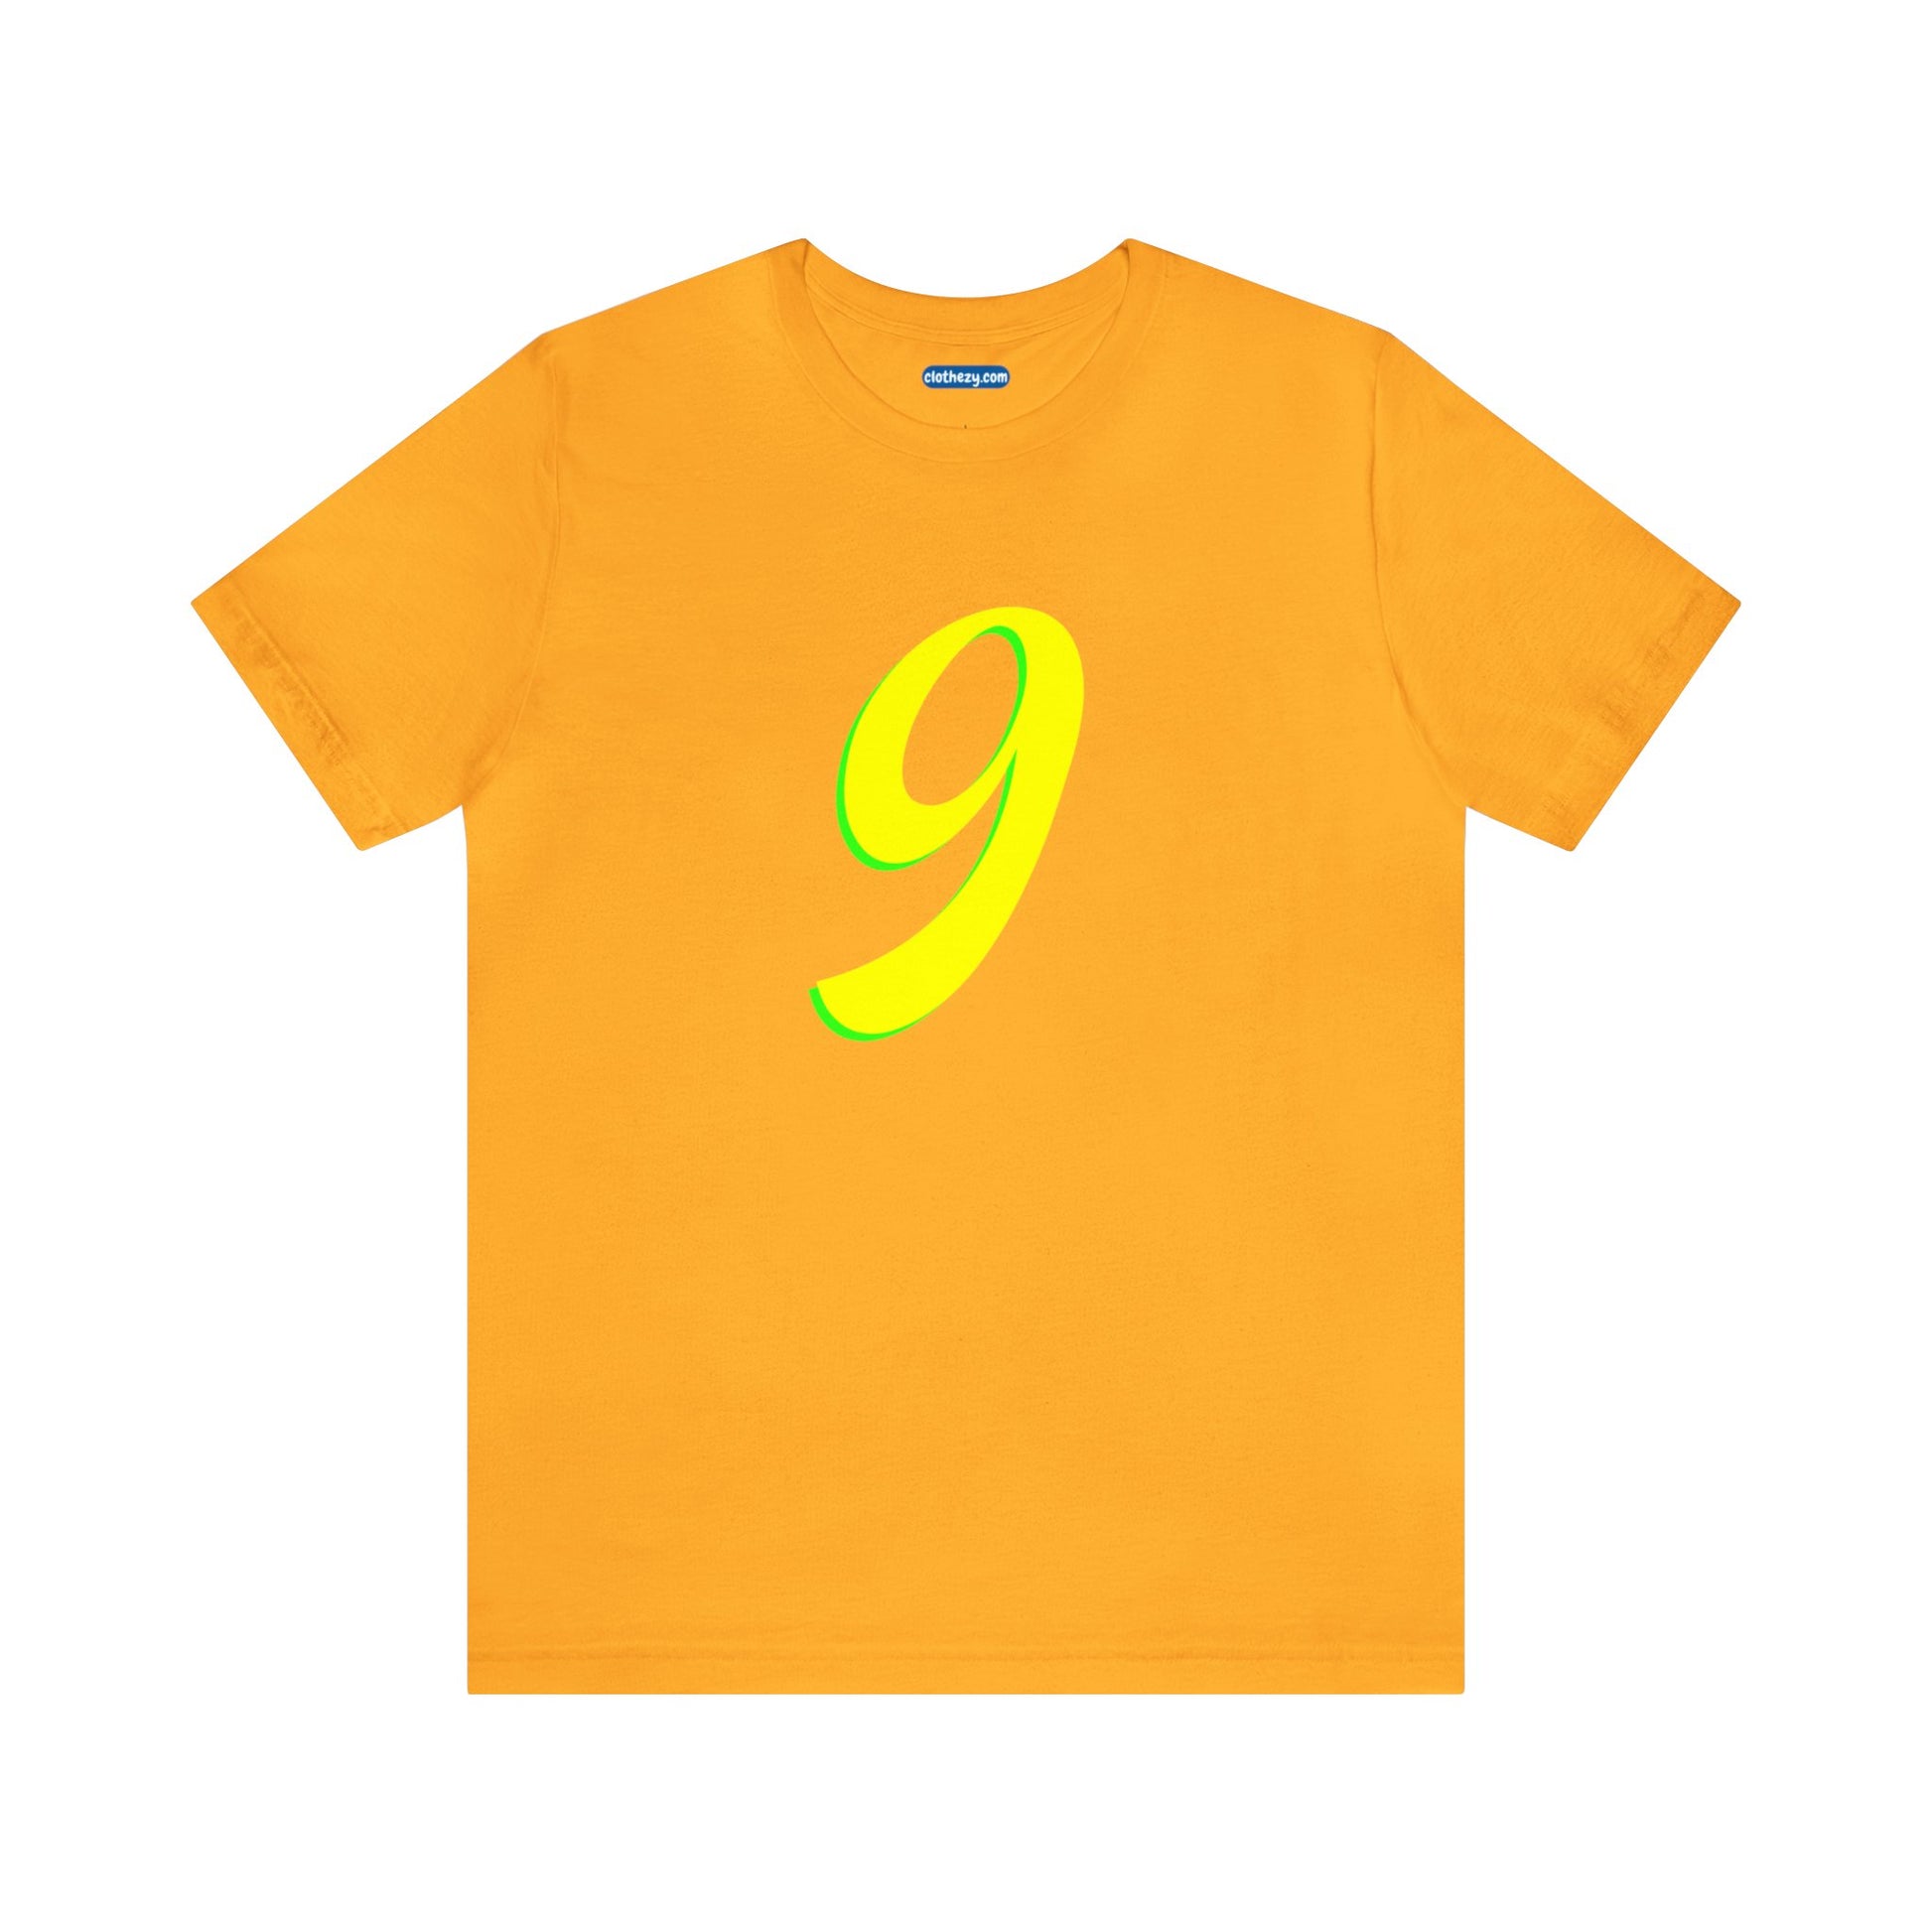 Number 9 Design - Soft Cotton Tee for birthdays and celebrations, Gift for friends and family, Multiple Options by clothezy.com in Green Heather Size Small - Buy Now